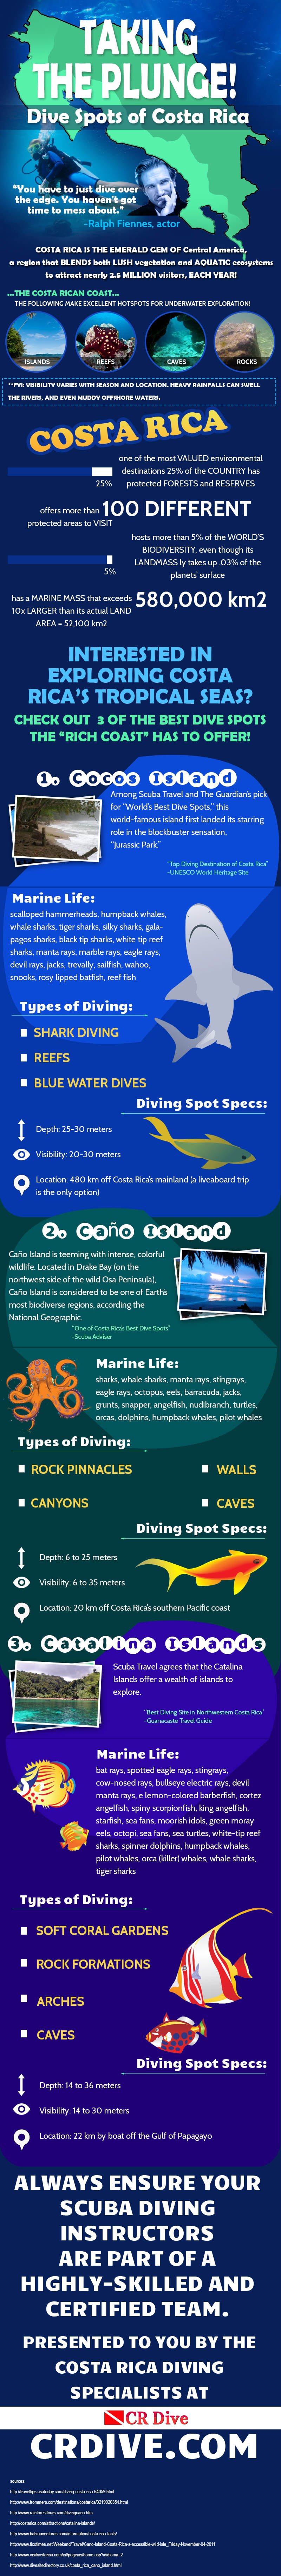 Taking the Plunge! Best Dive Spots of Costa Rica